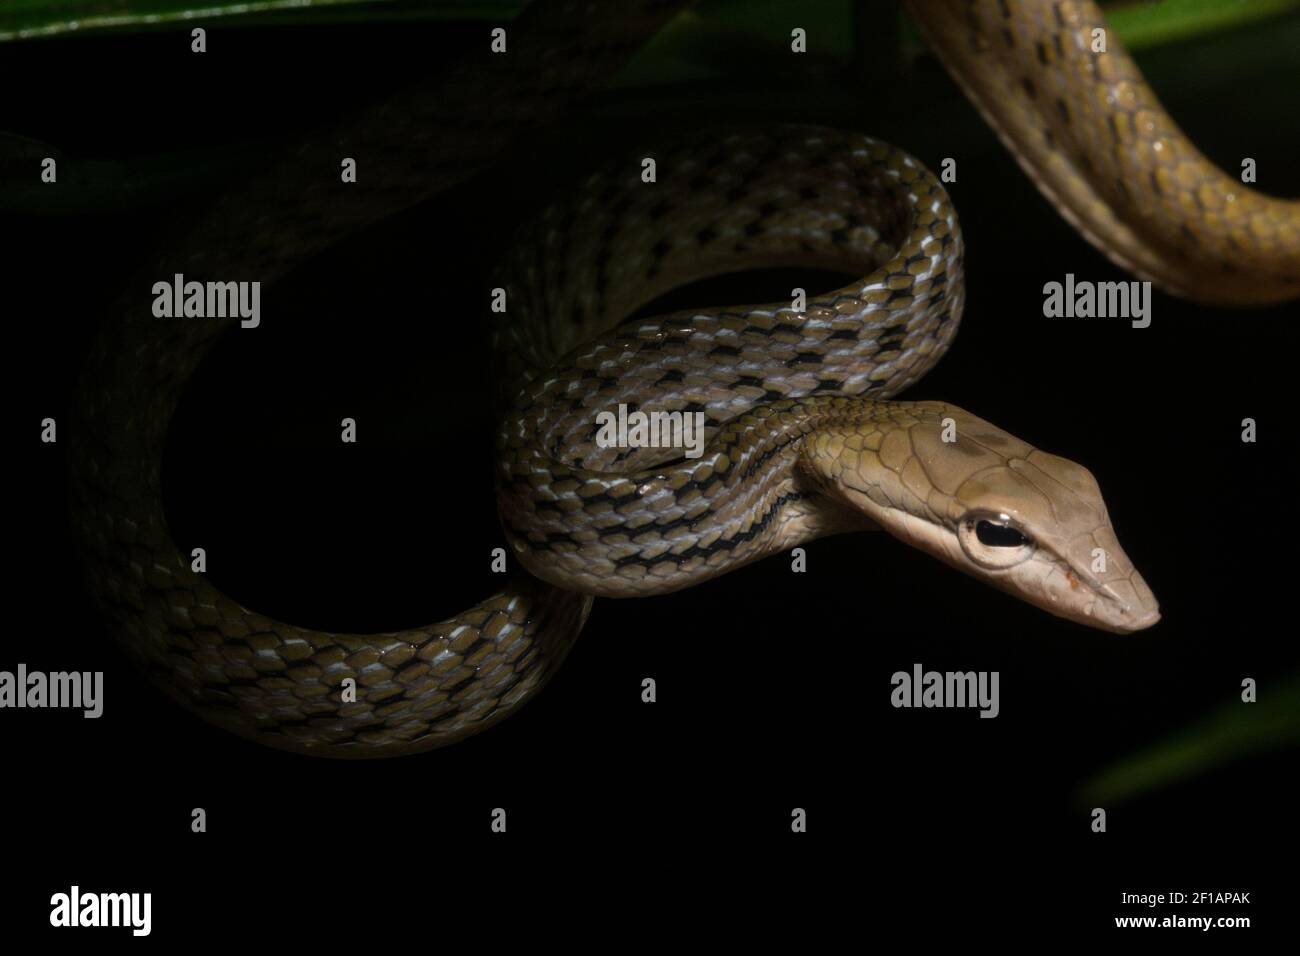 A tan morph of the Asian vine snake (Ahaetulla prasina) an arboreal reptile in Sabah, Malaysia at Danum Valley conservation area in Borneo. Stock Photo